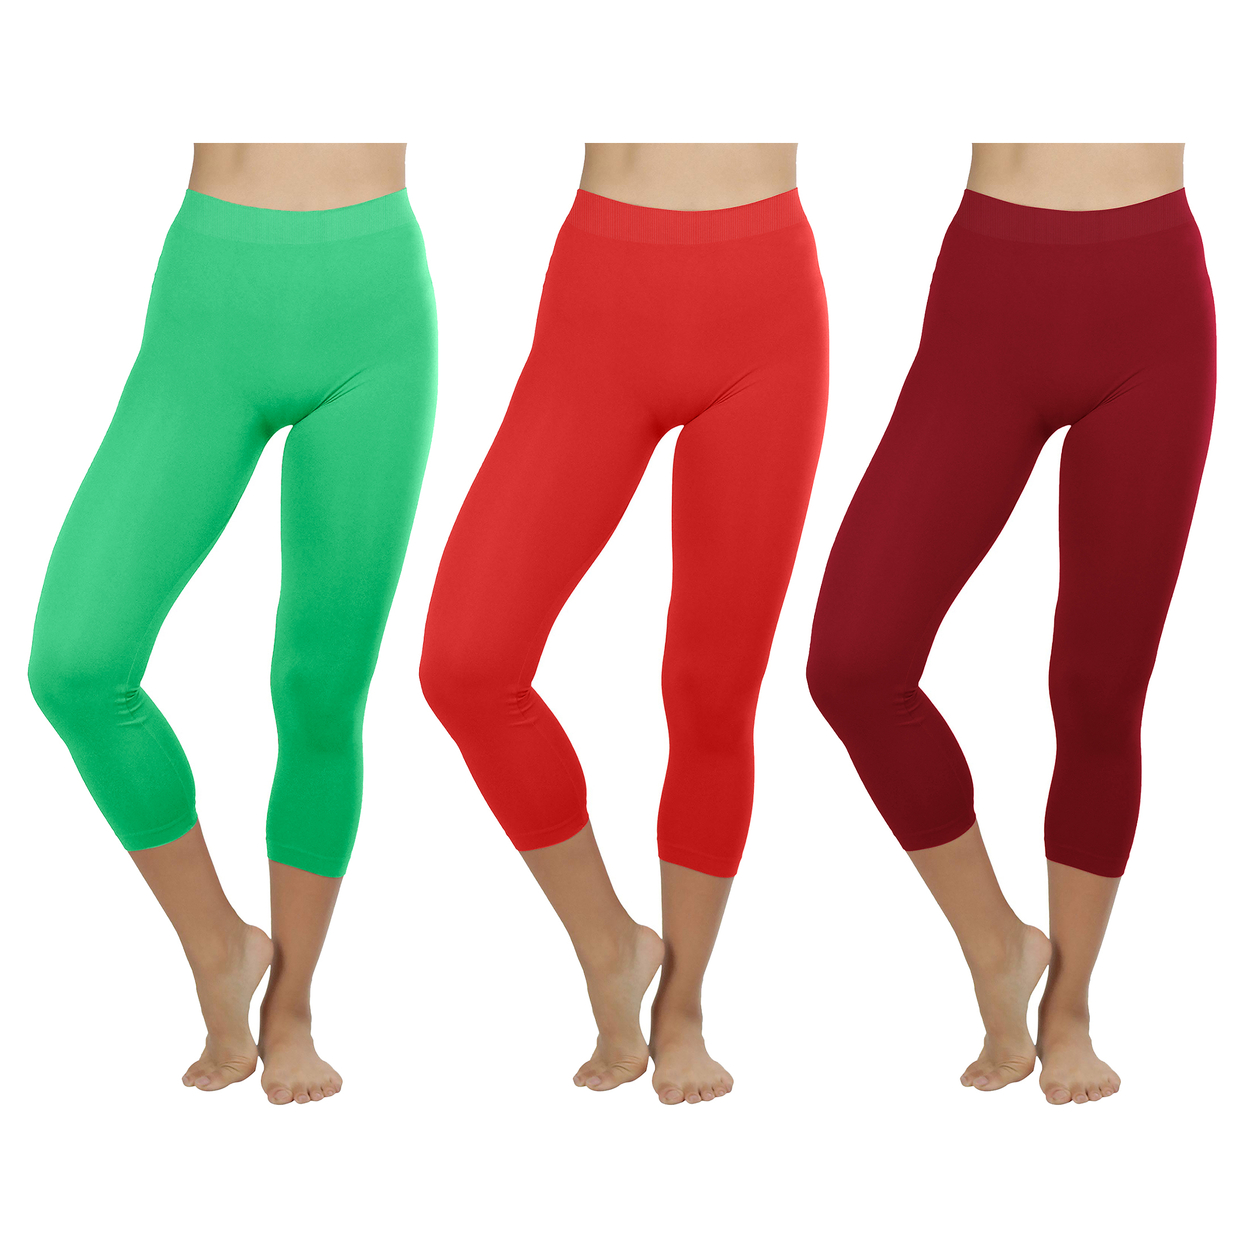 2-Pack: Women's Ultra-Soft High Waisted Smooth Stretch Active Yoga Capri Leggings - Green &red, Medium